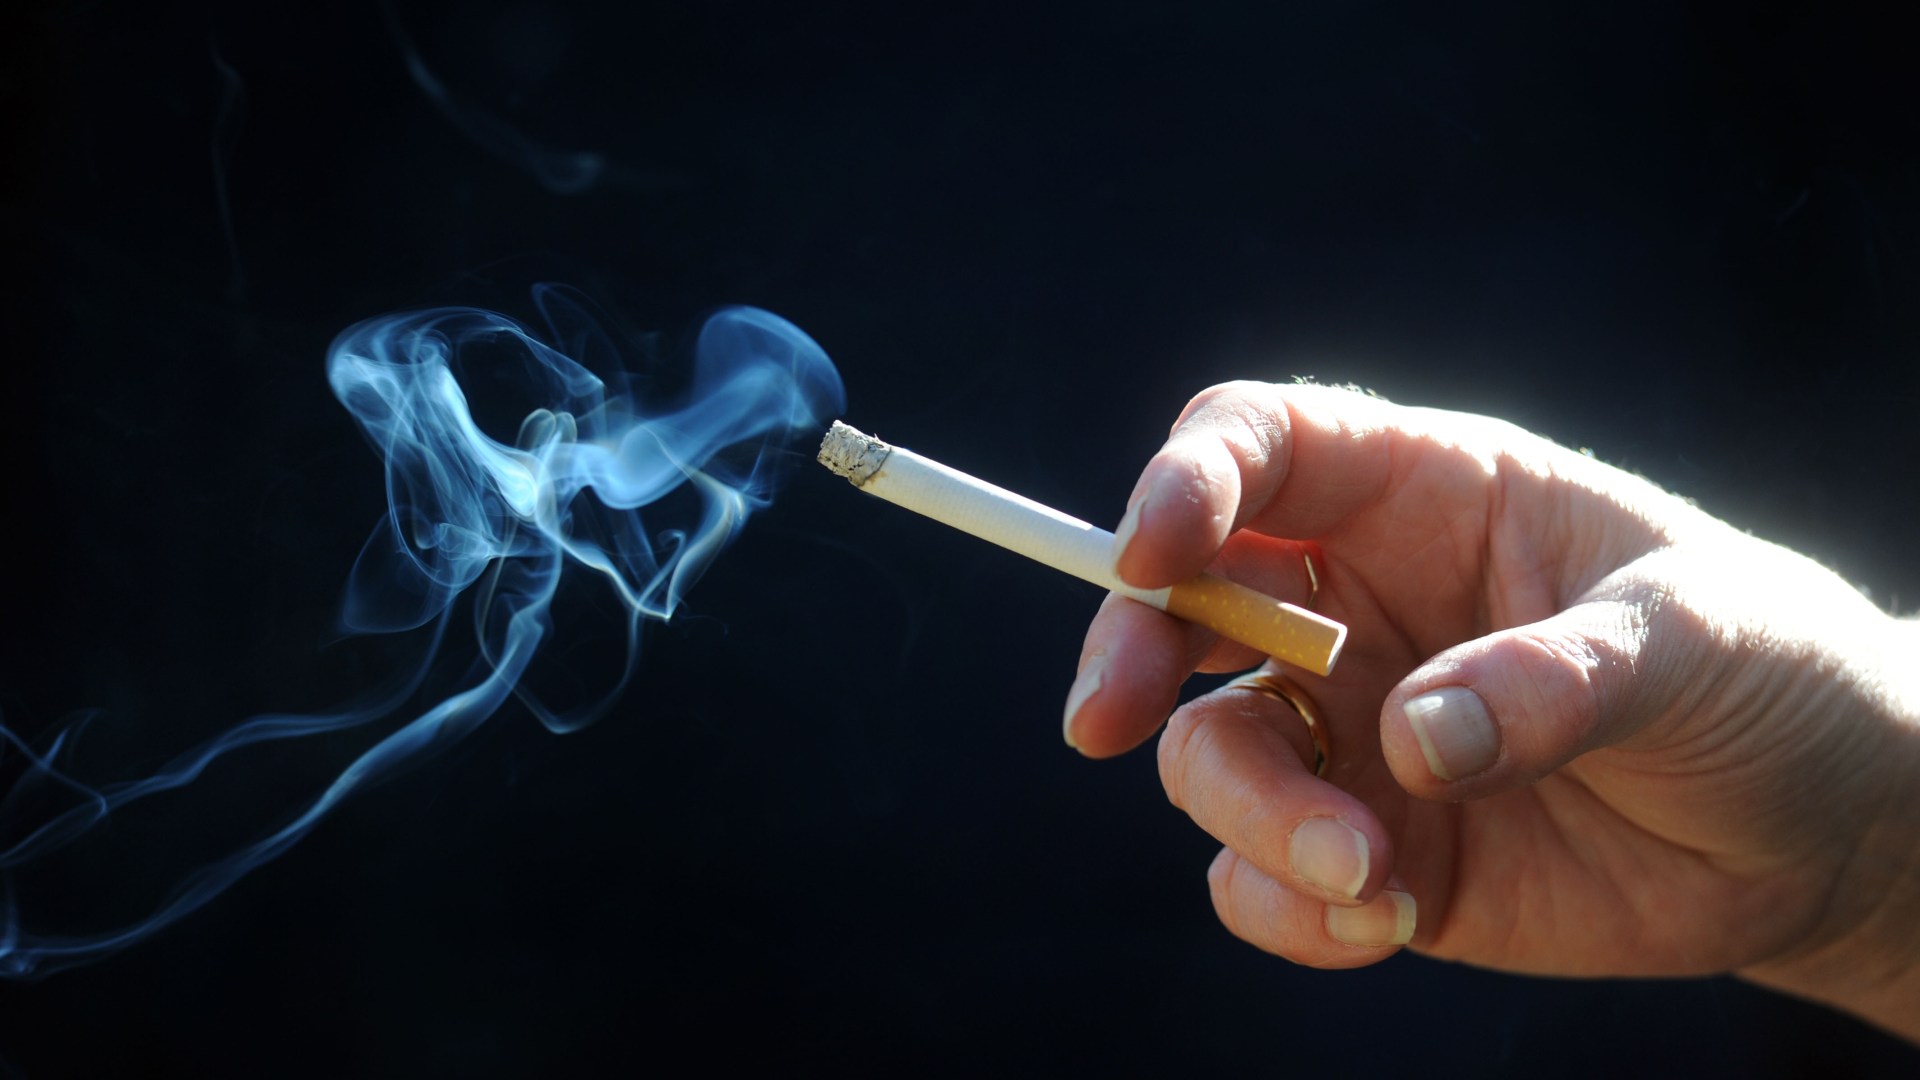 Cancer cases caused by smoking hit an all-time high - with 160 Brits diagnosed every day [Video]